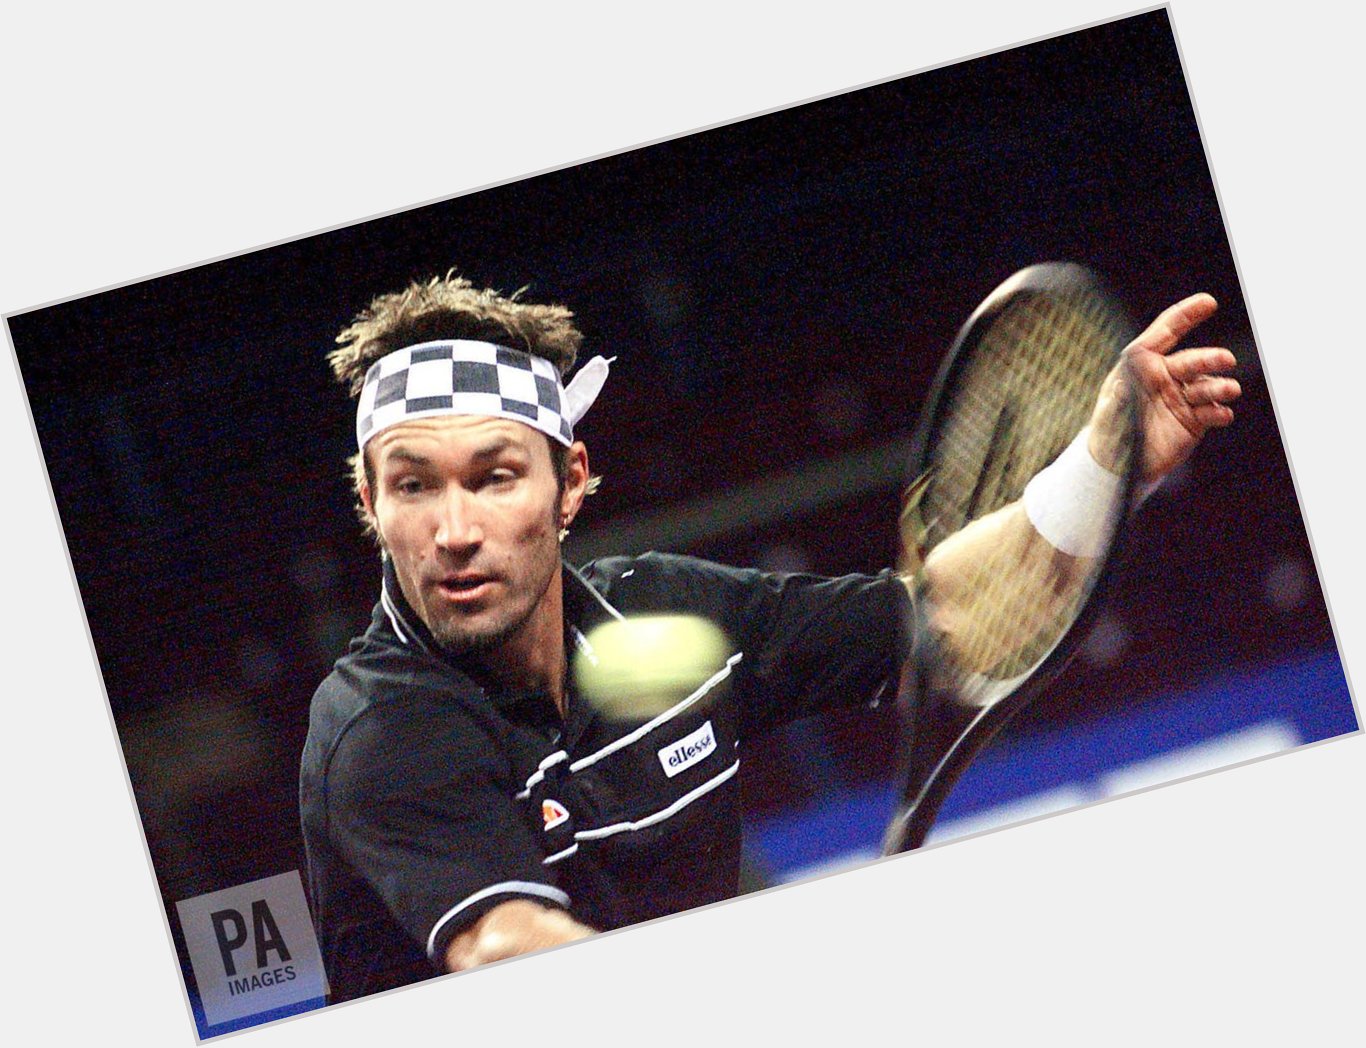 Happy birthday to 1987 Wimbledon champion Pat Cash who is celebrating his 53rd birthday today. 